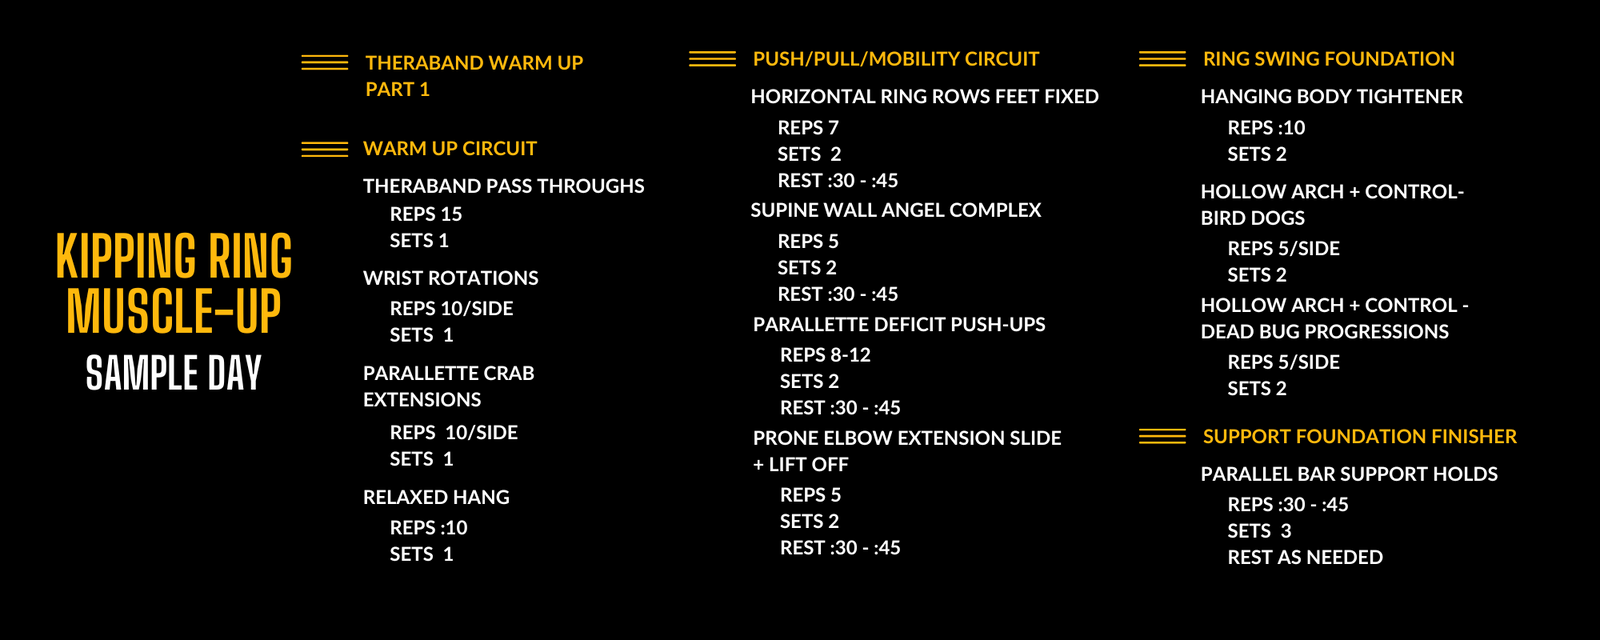 Kipping ring muscle up sample day of programming in the power monkey training app.